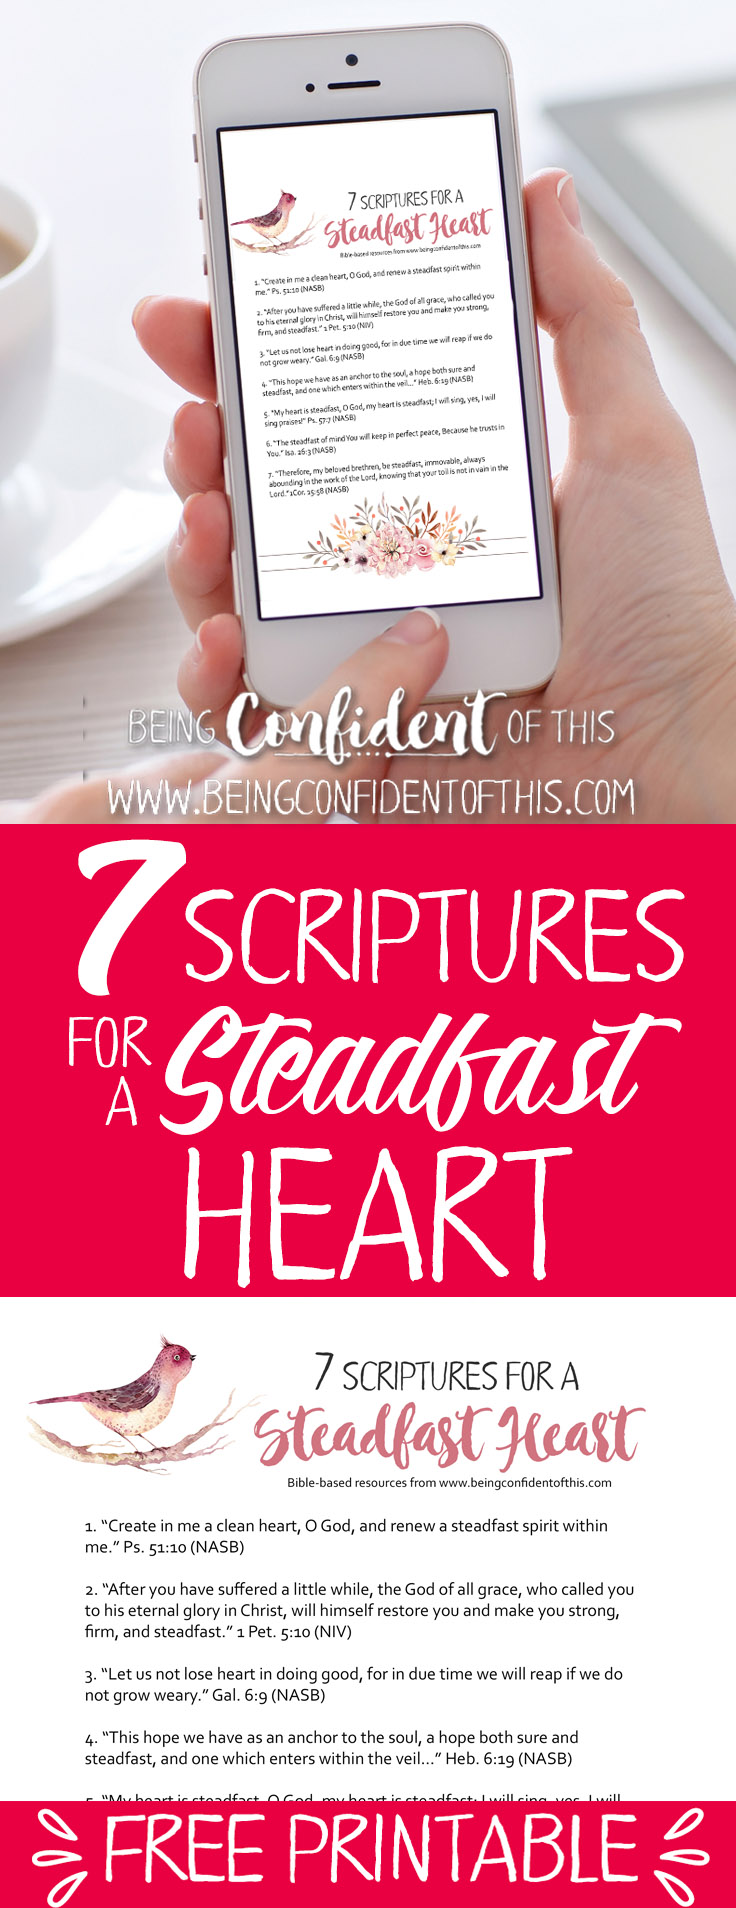 Print out this free Scripture reminder of how to be a steadfast woman! Use God's Holy Word to help strengthen your faith and give you confidence. Becoming a Steadfast Woman, christian women, bible verses for confidence, studying the bible, faith, faith blog, christian mom, christian wife, free printables, free faith-based resources